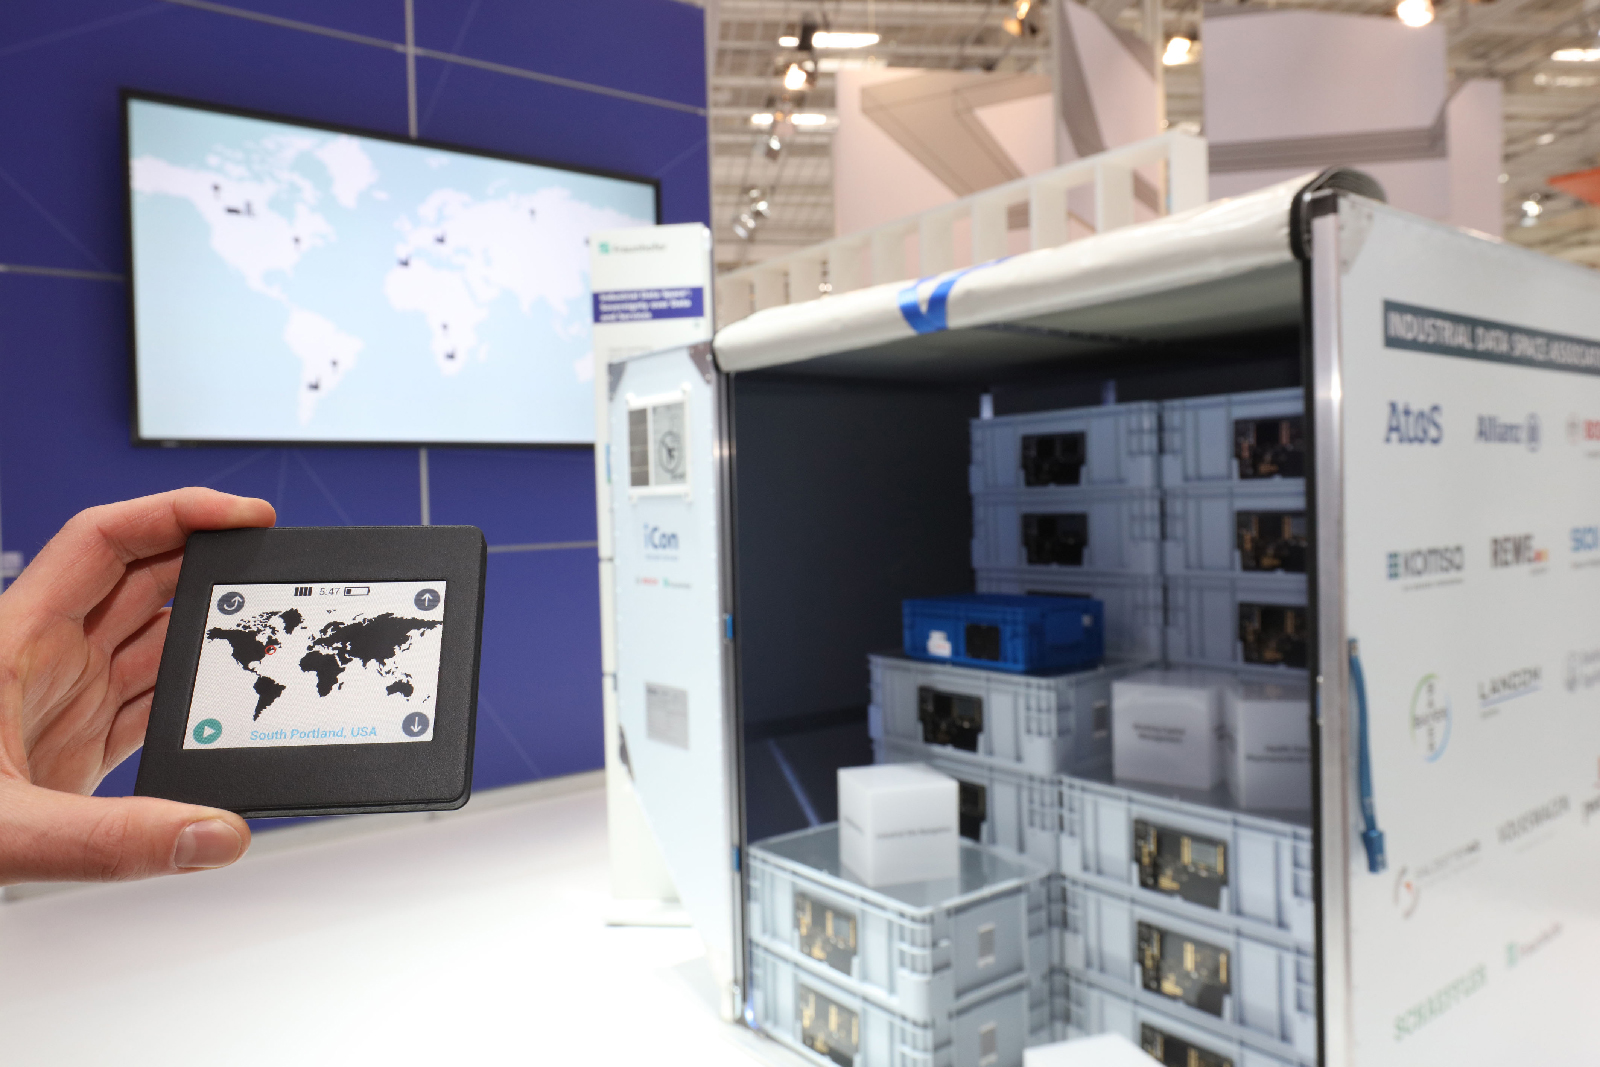 A mobile control unit (see foreground) can be used to communicate securely with a smart air freight container – just one of the applications for the Industrial Data Space.